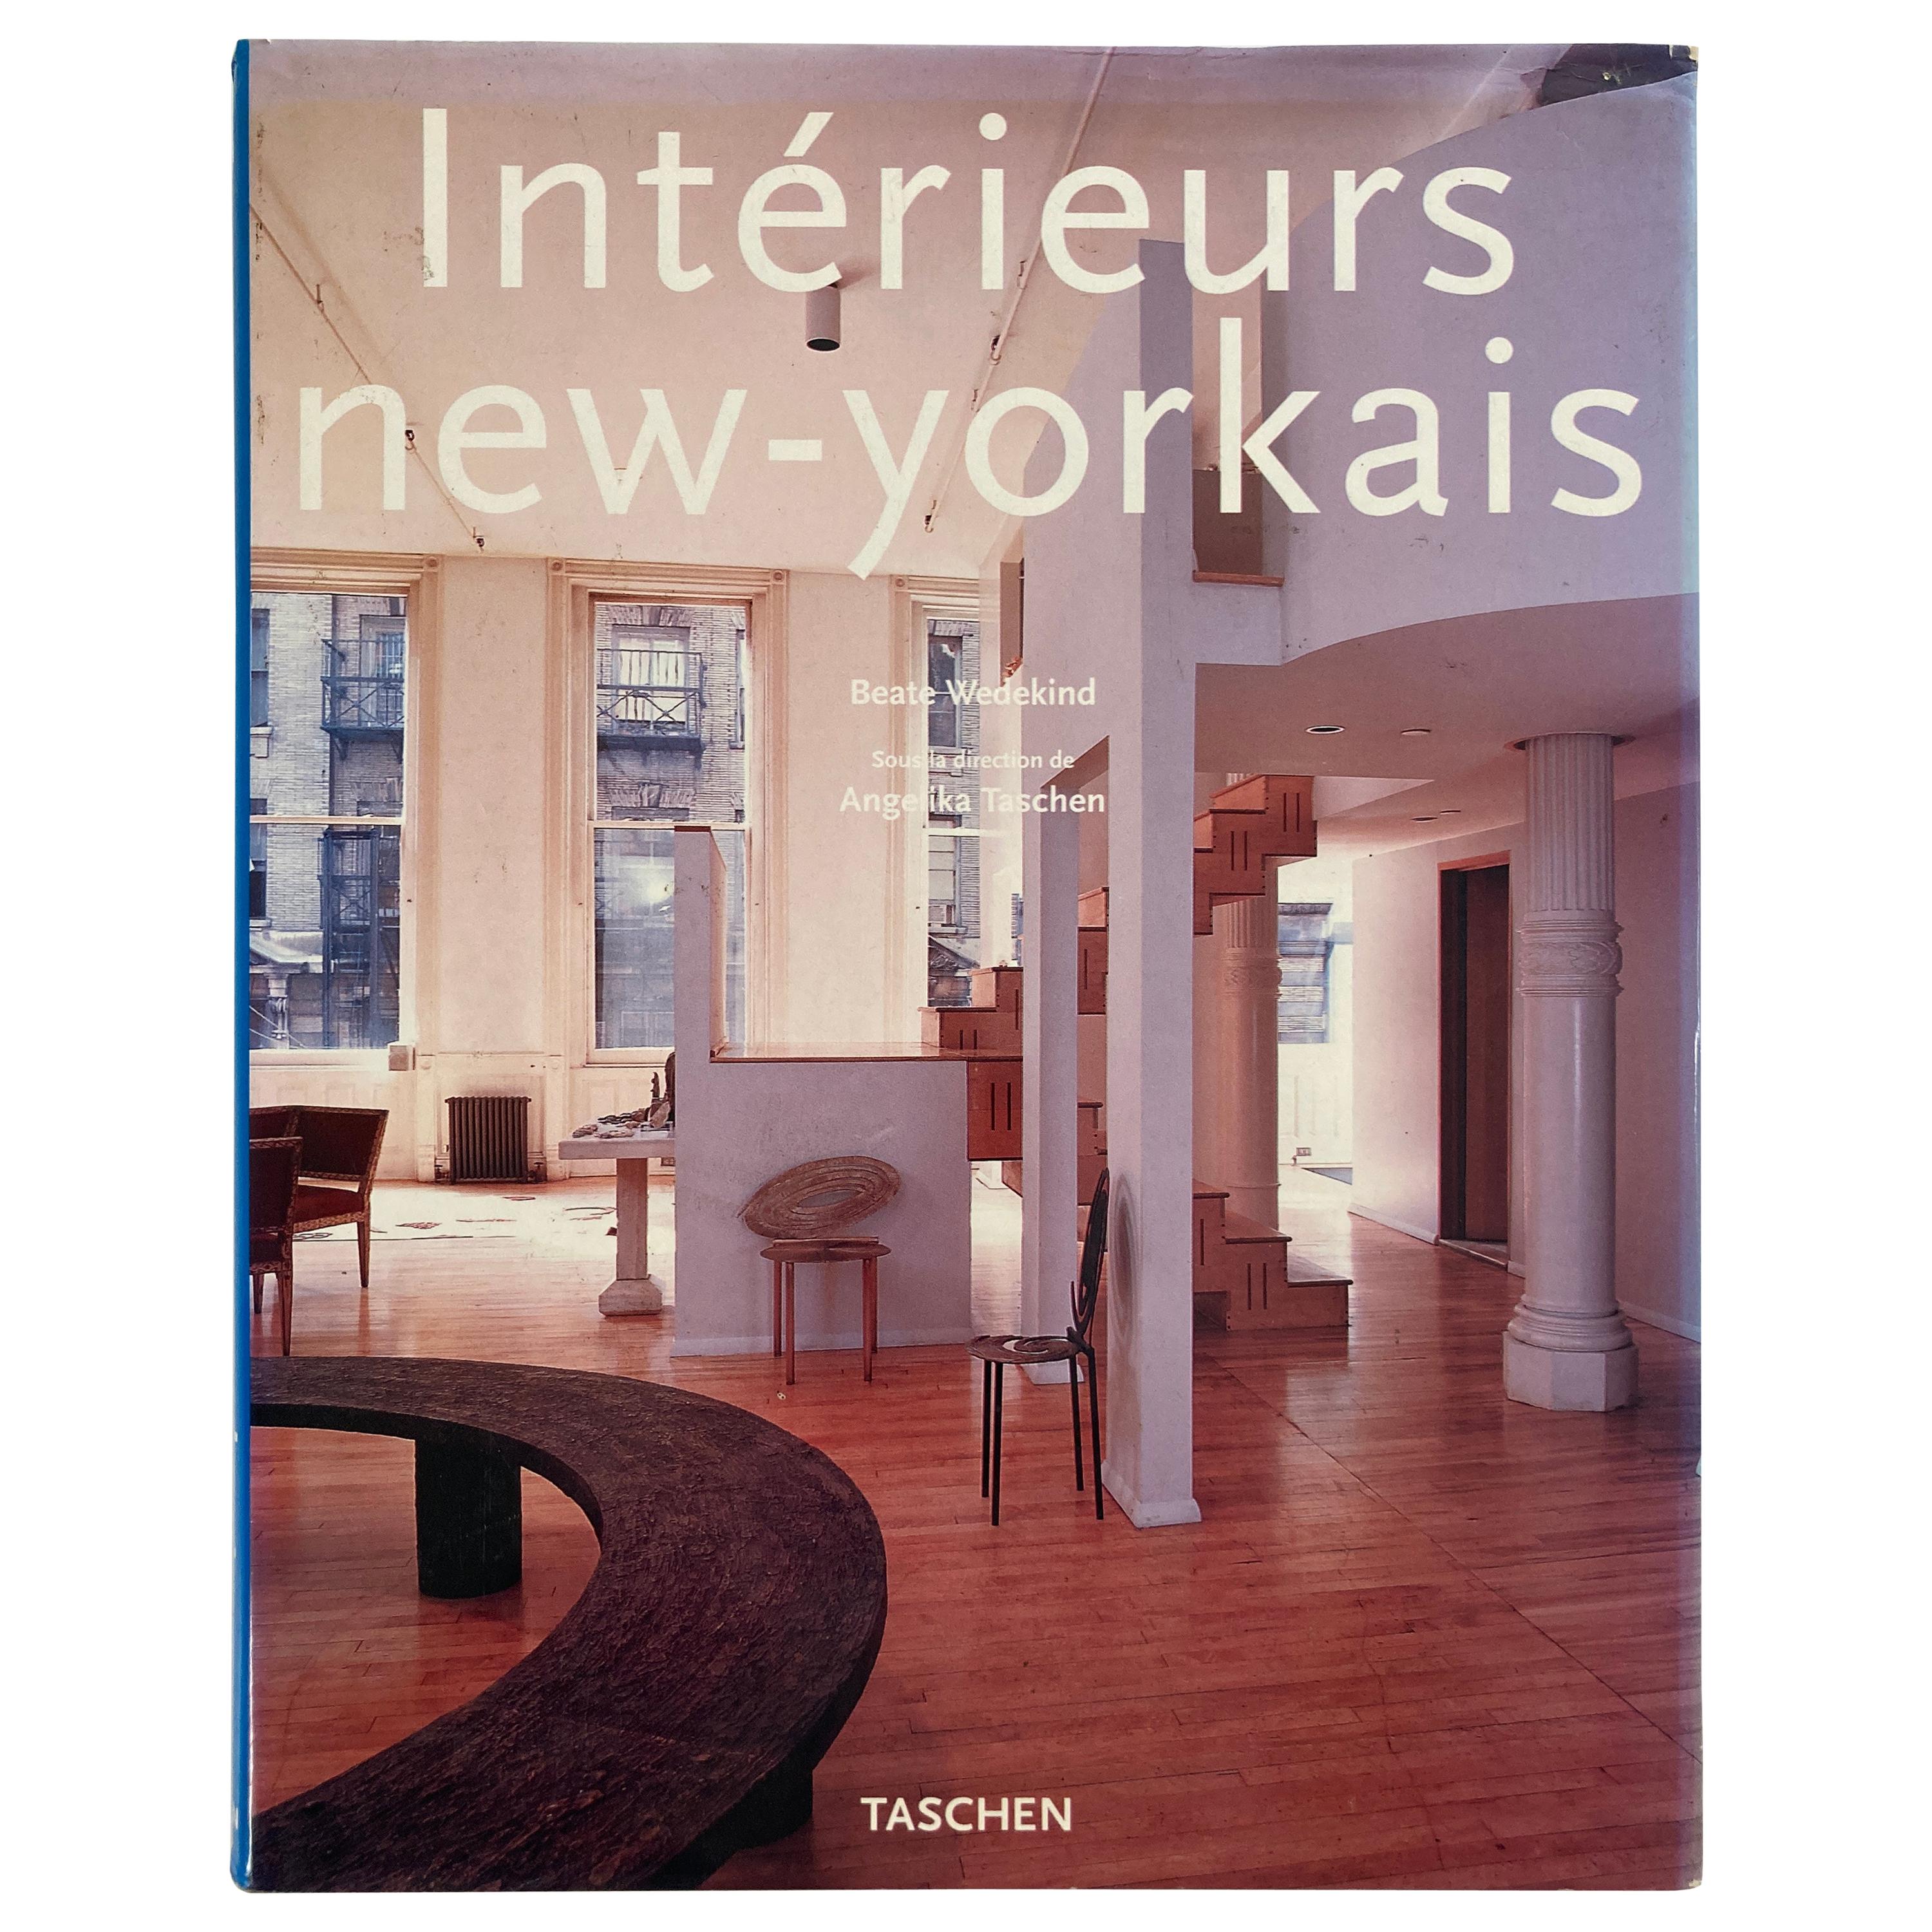 Interieurs New-Yorkais Hardcover Book by Angelika Taschen 1997